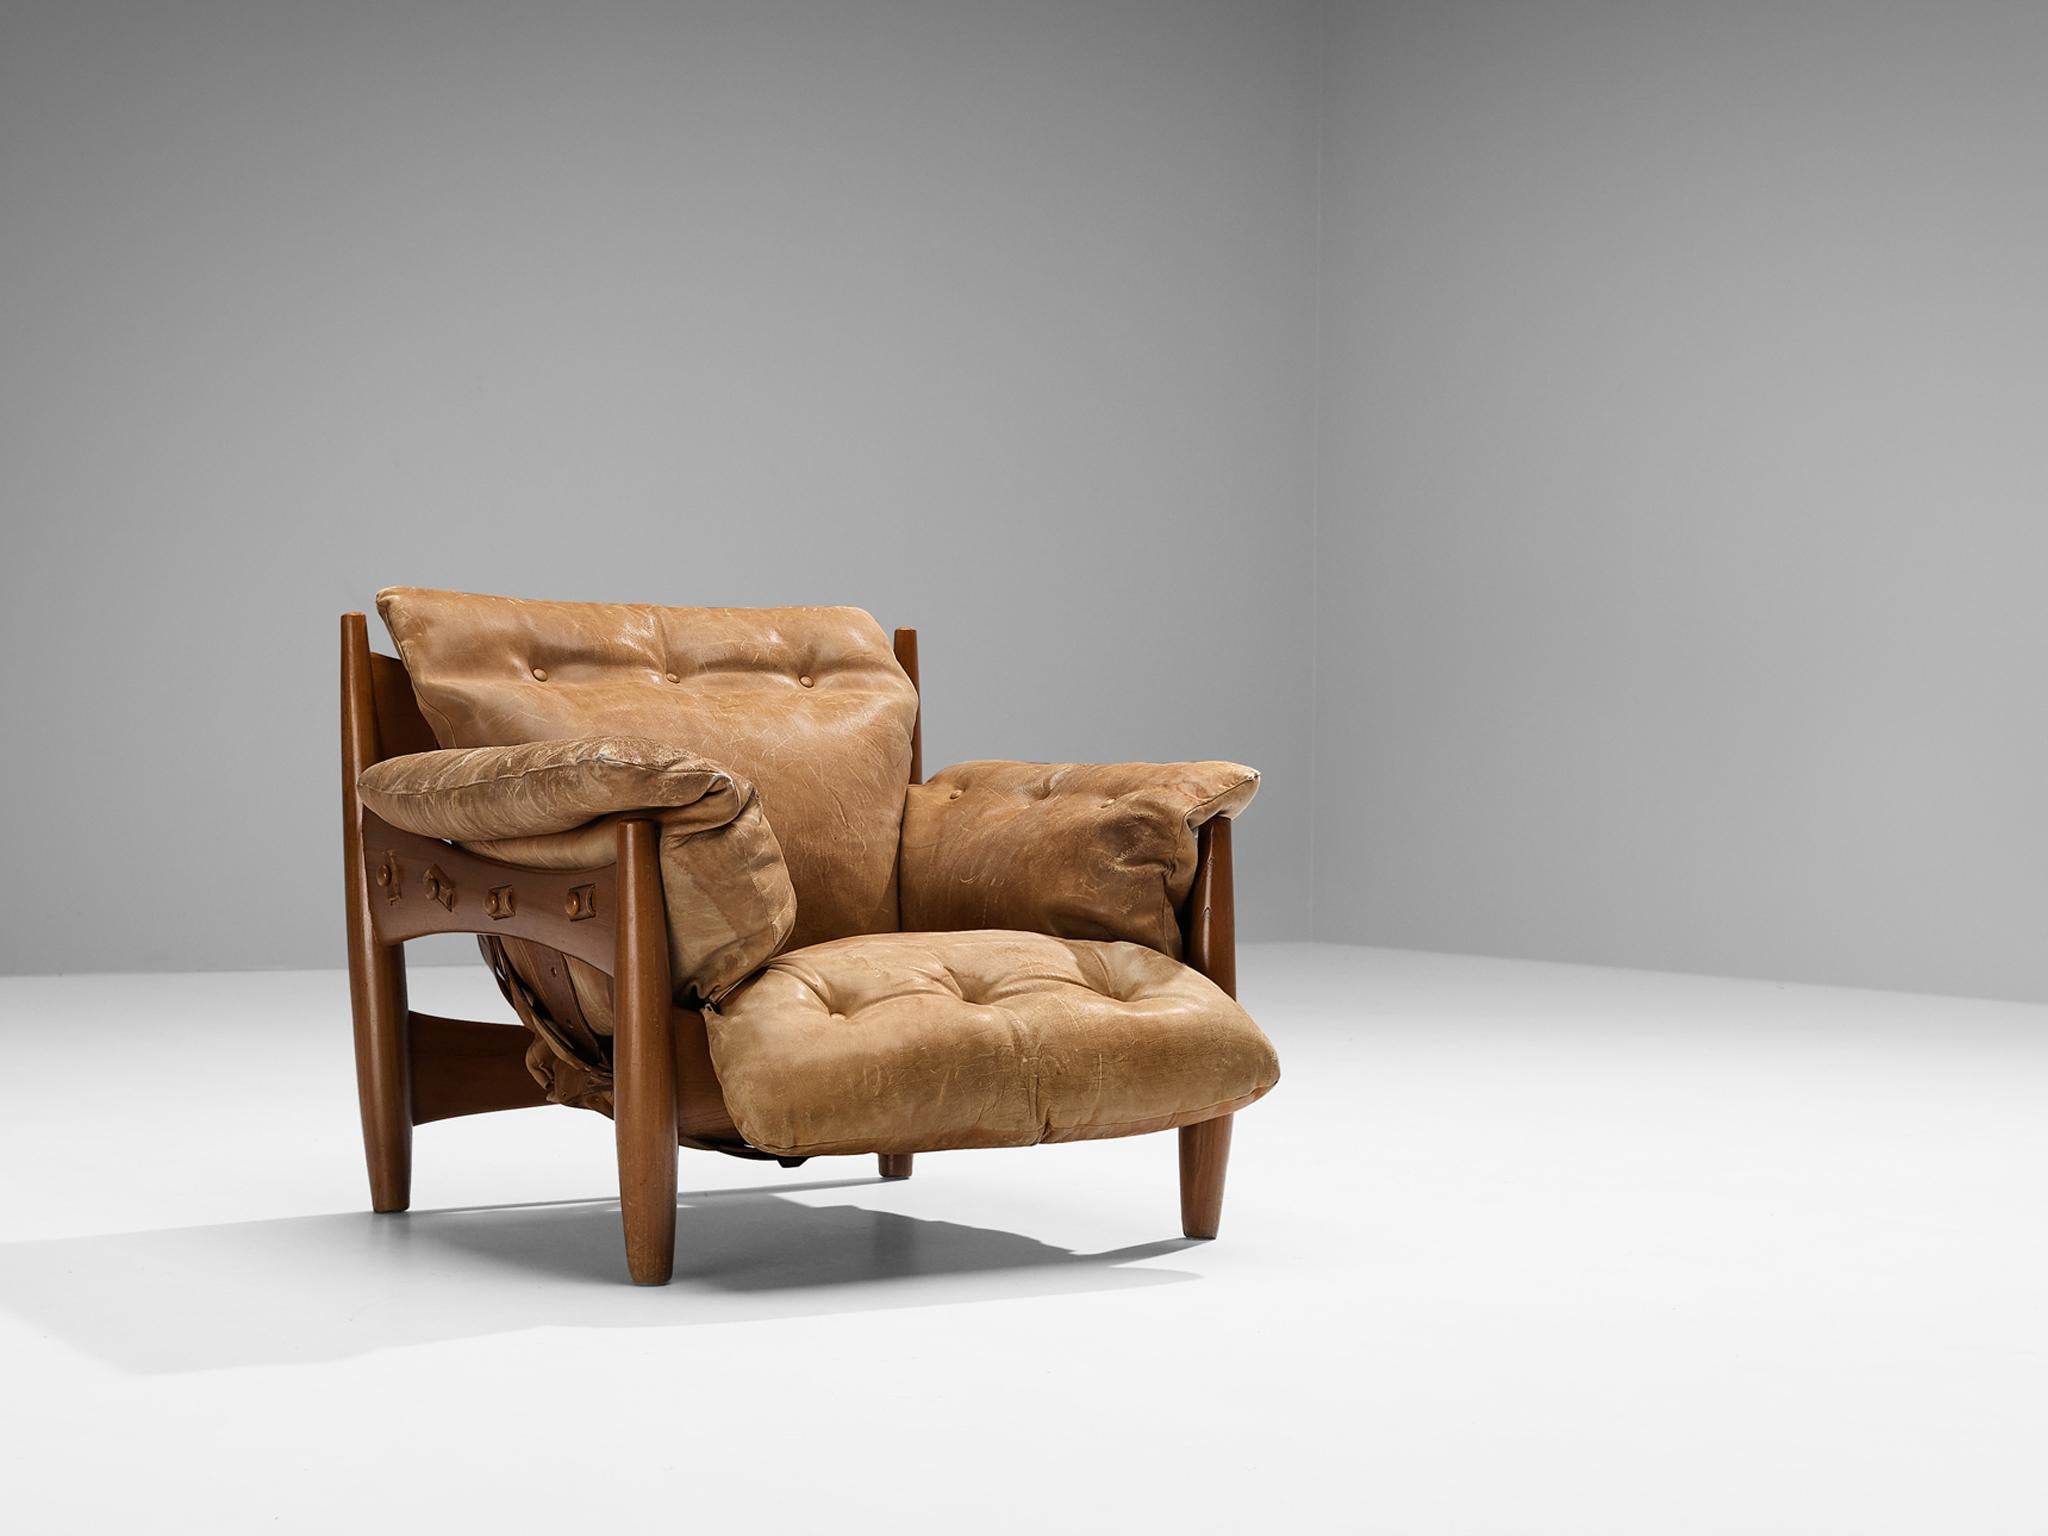 Sergio Rodrigues, 'Sheriff' lounge chair, leather, walnut, Brazil, 1960s.

Comfortable and extravagant lounge chair by Brazilian designer Sergio Rodrigues. This armchairs breathes the characteristics of Brazilian modern furniture design; low